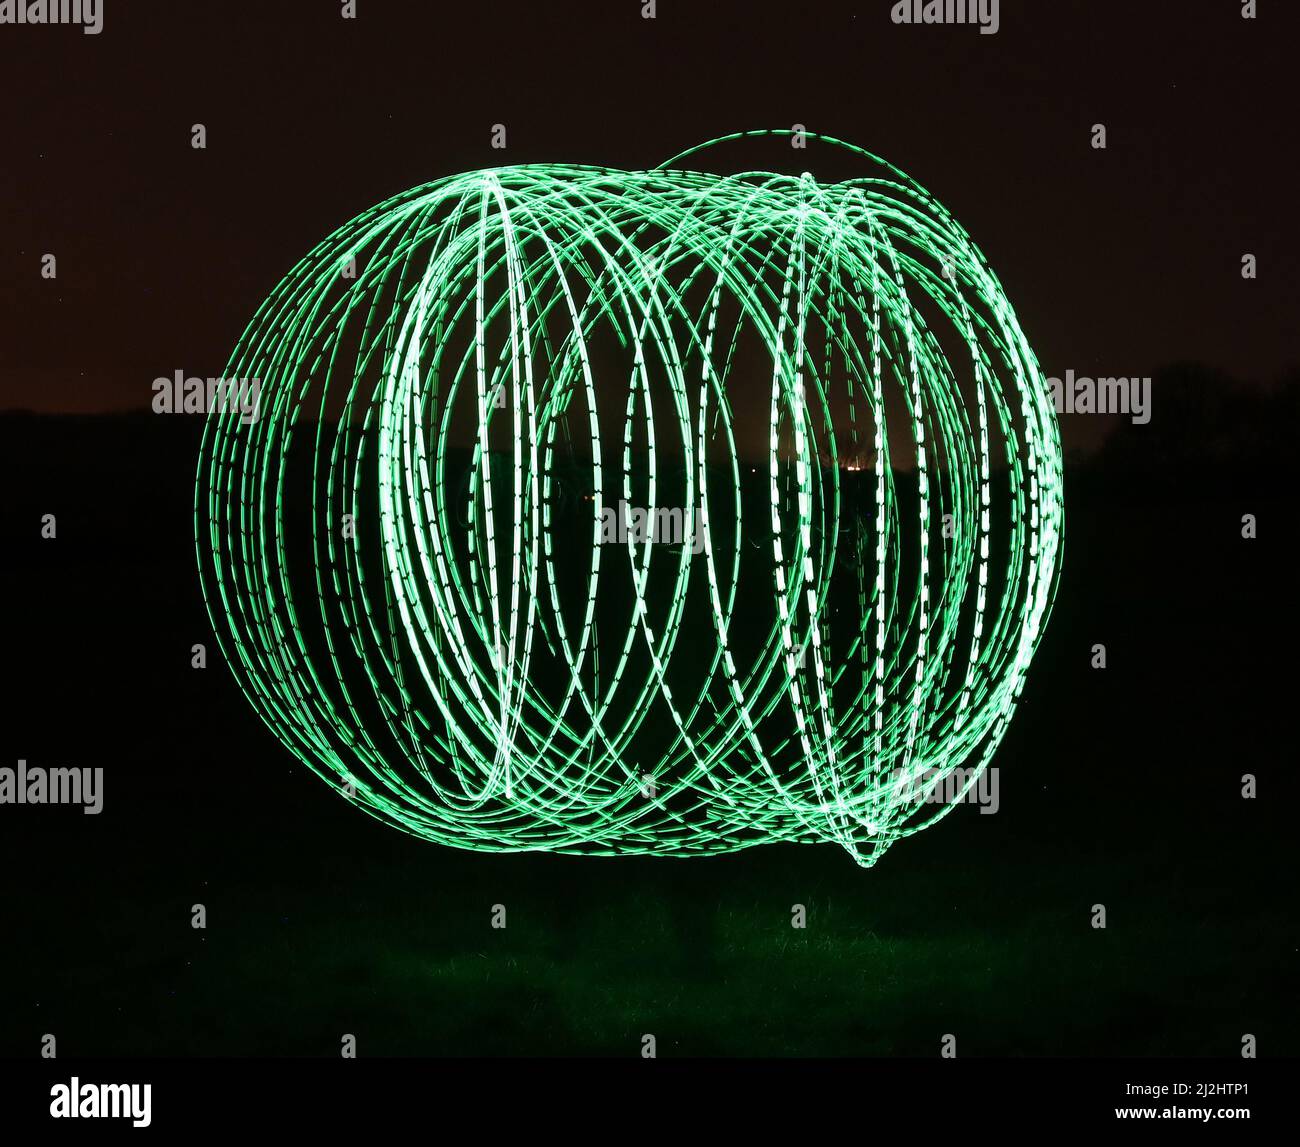 Light photography green rings Stock Photo